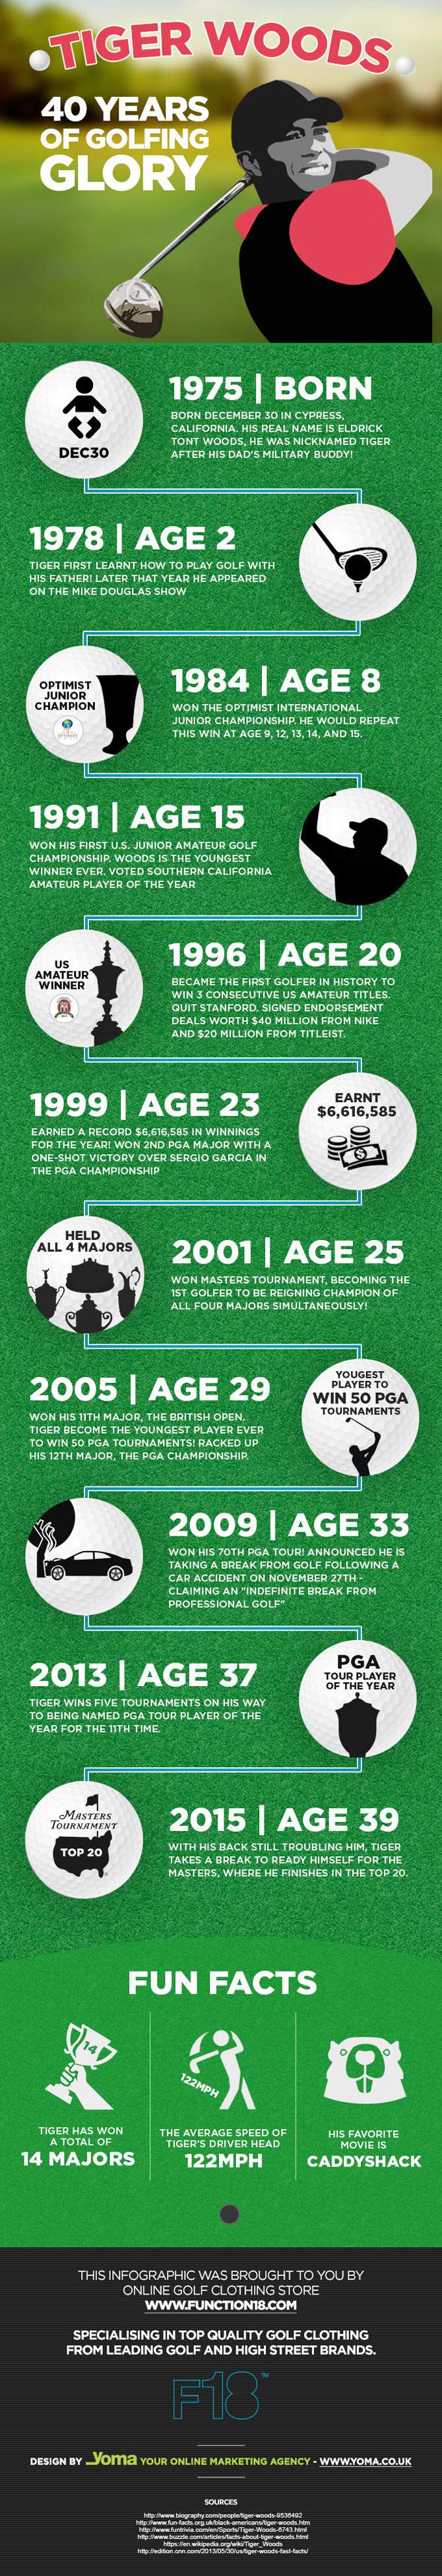 40 Year's of Tiger Woods